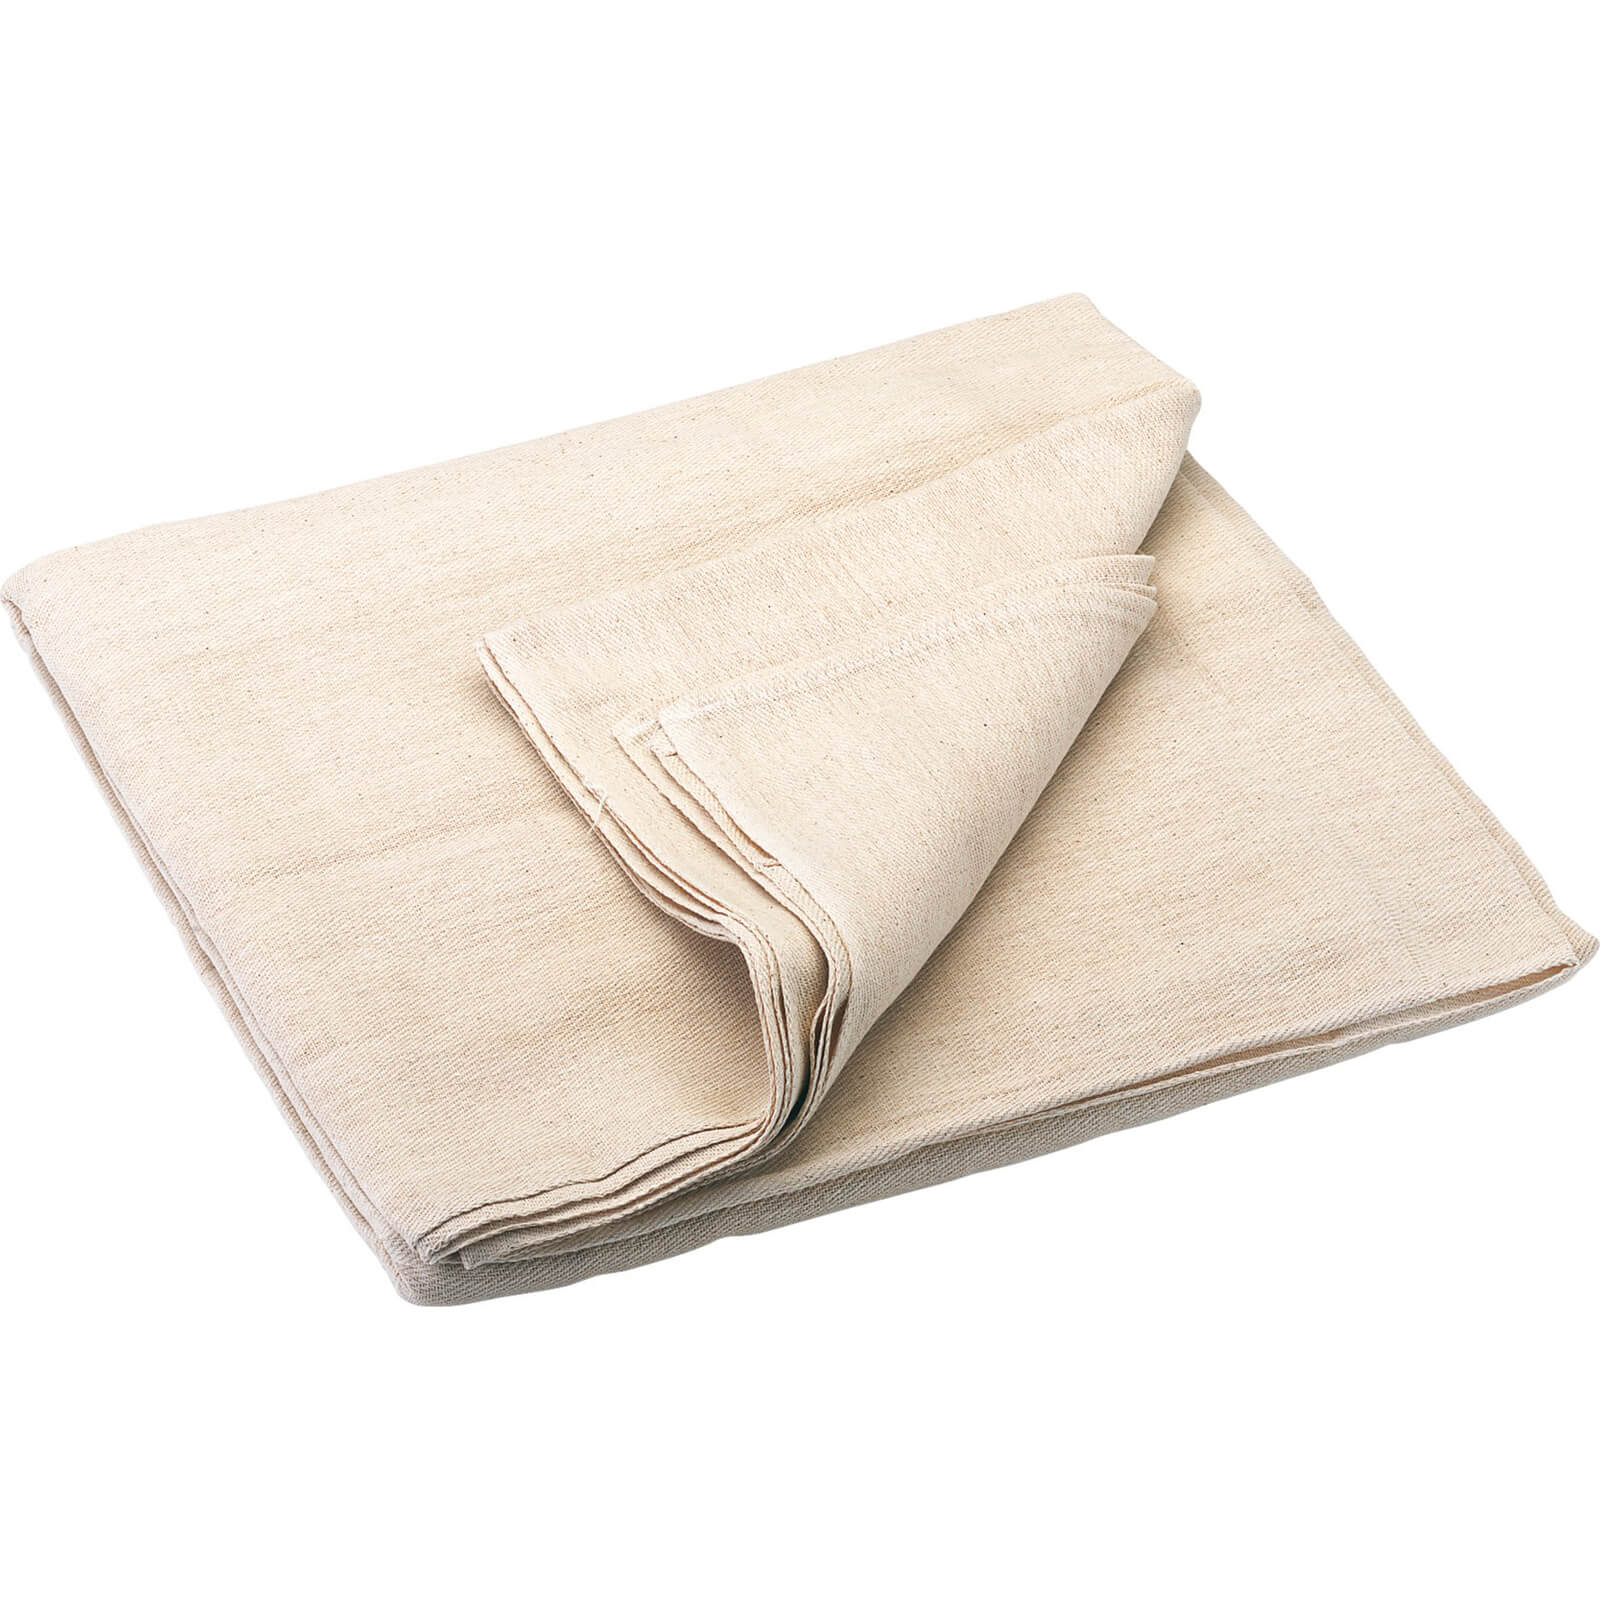 Image of Draper Cotton Dust Sheet 3.6m 2.7m Pack of 1